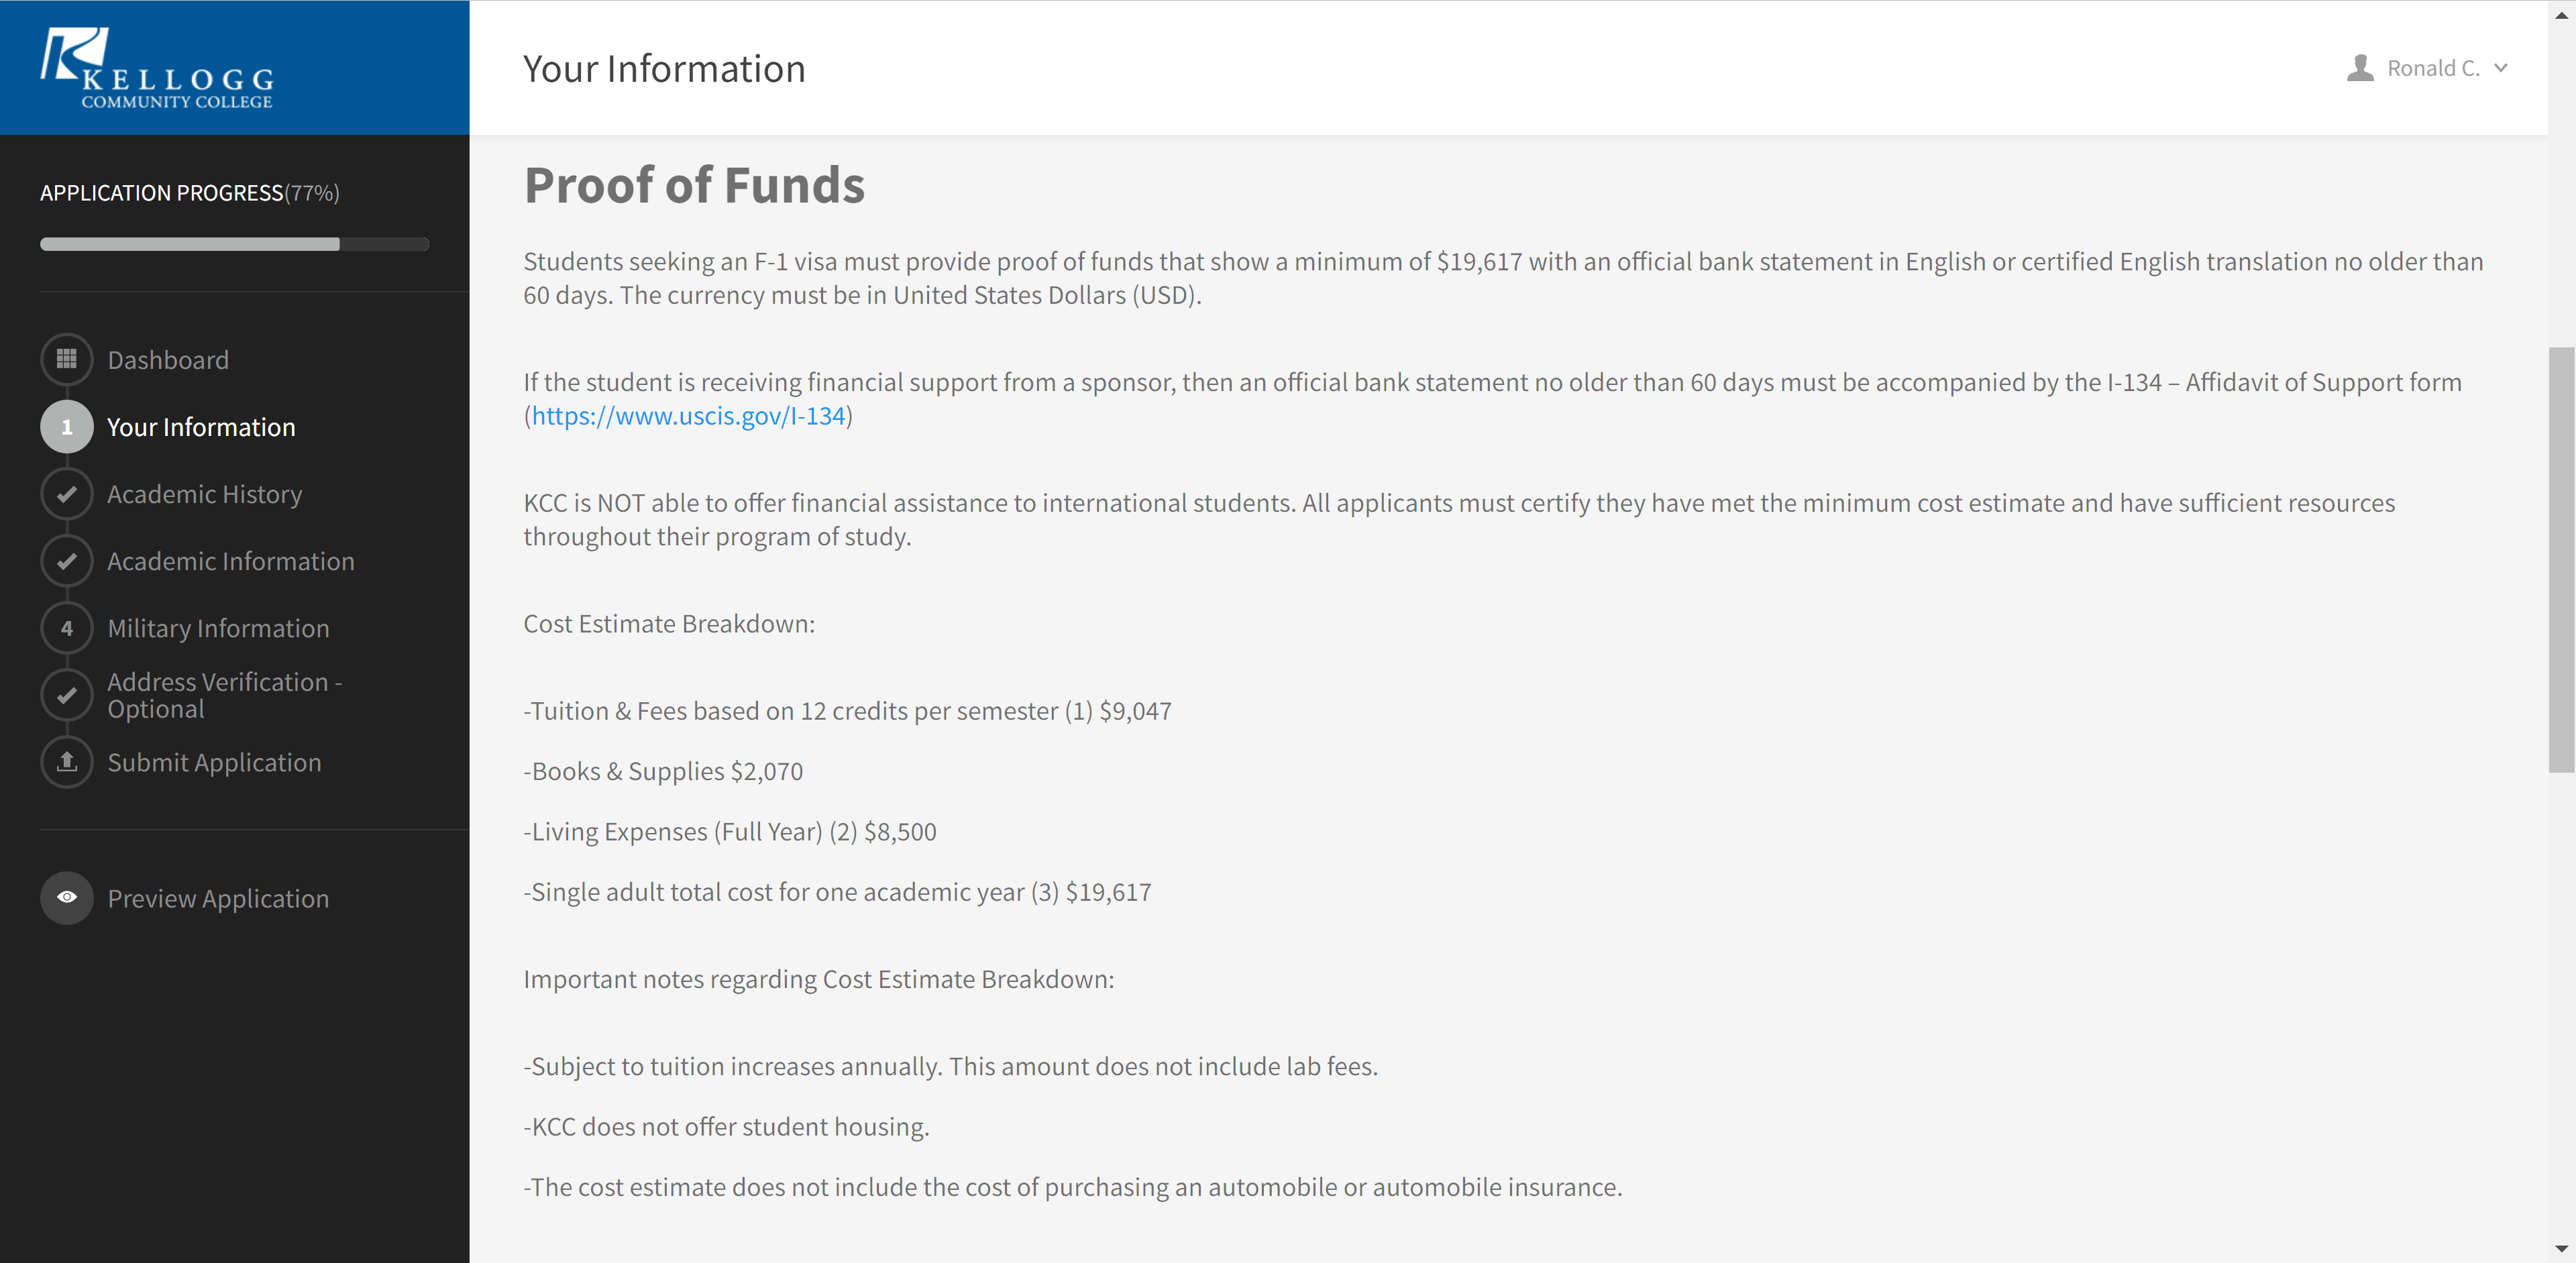 Proof of funds information image